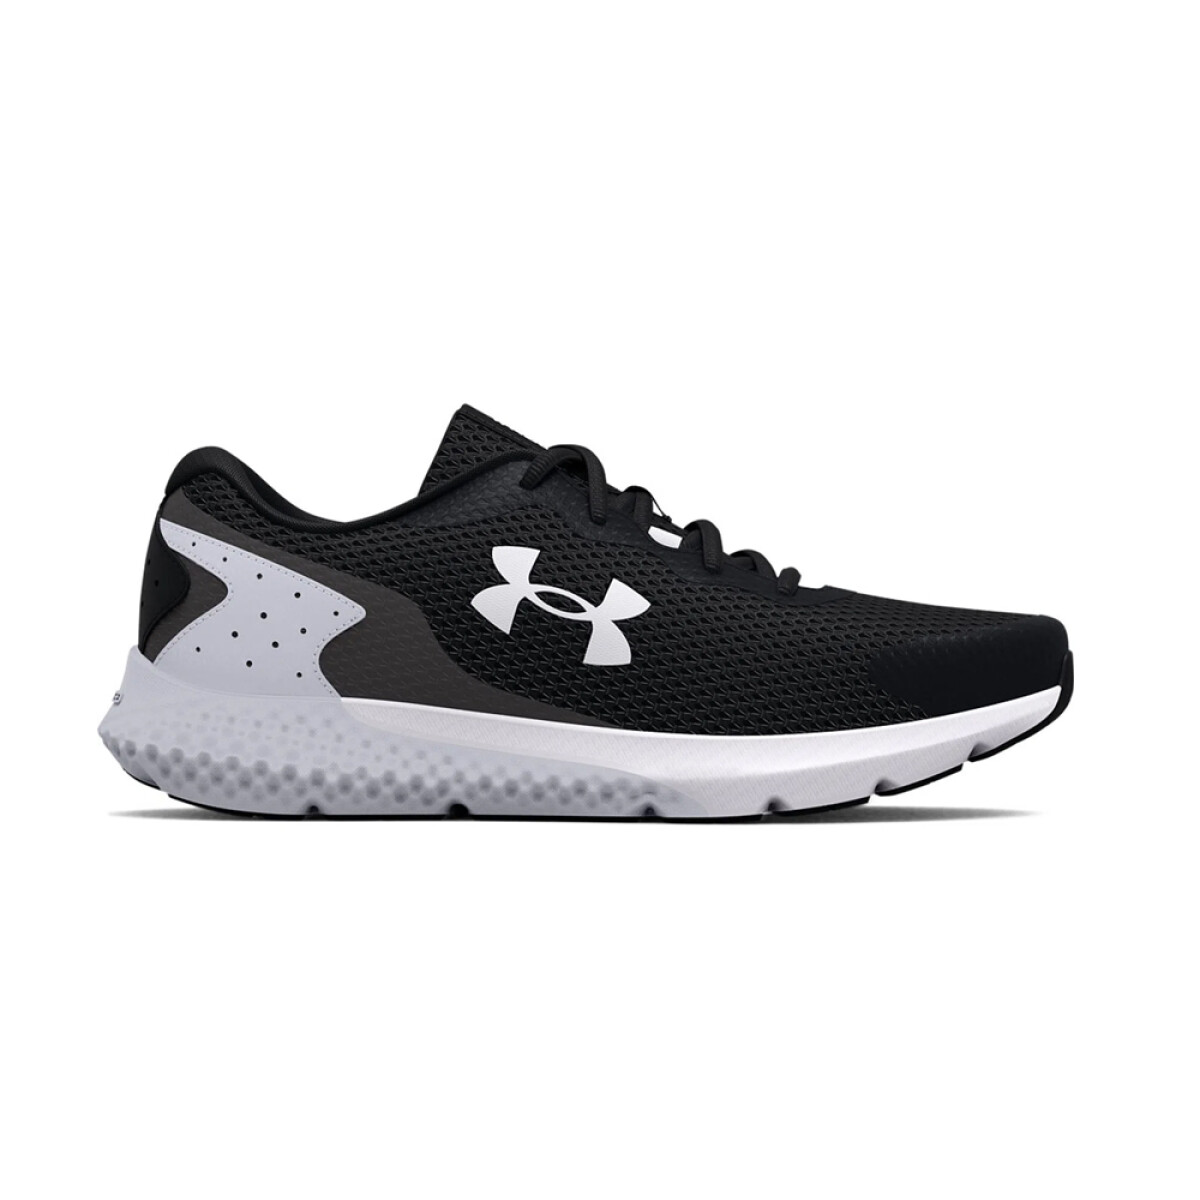 Under Armour Charged Rogue 3 - Black/White 